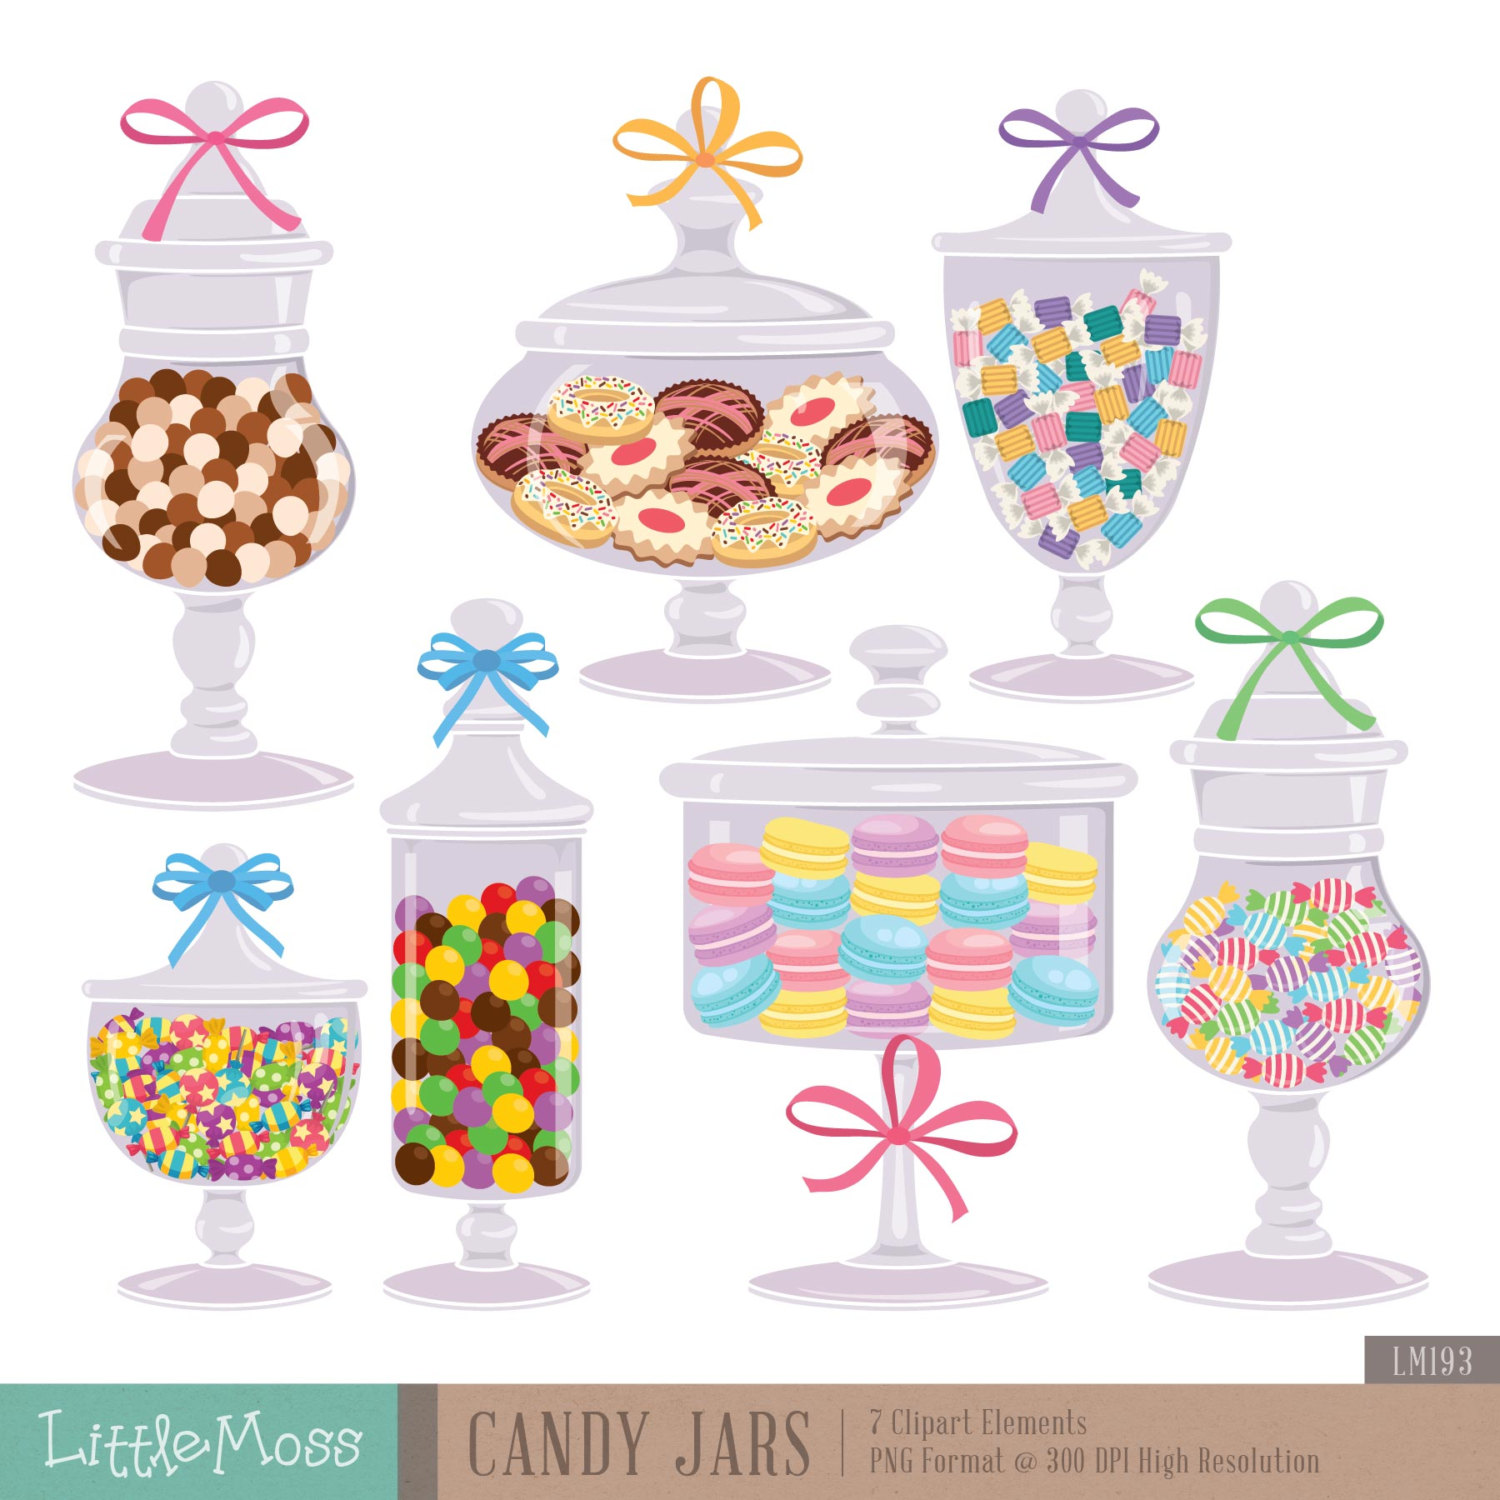 Sweet jar clipart 11 » Clipart Station.